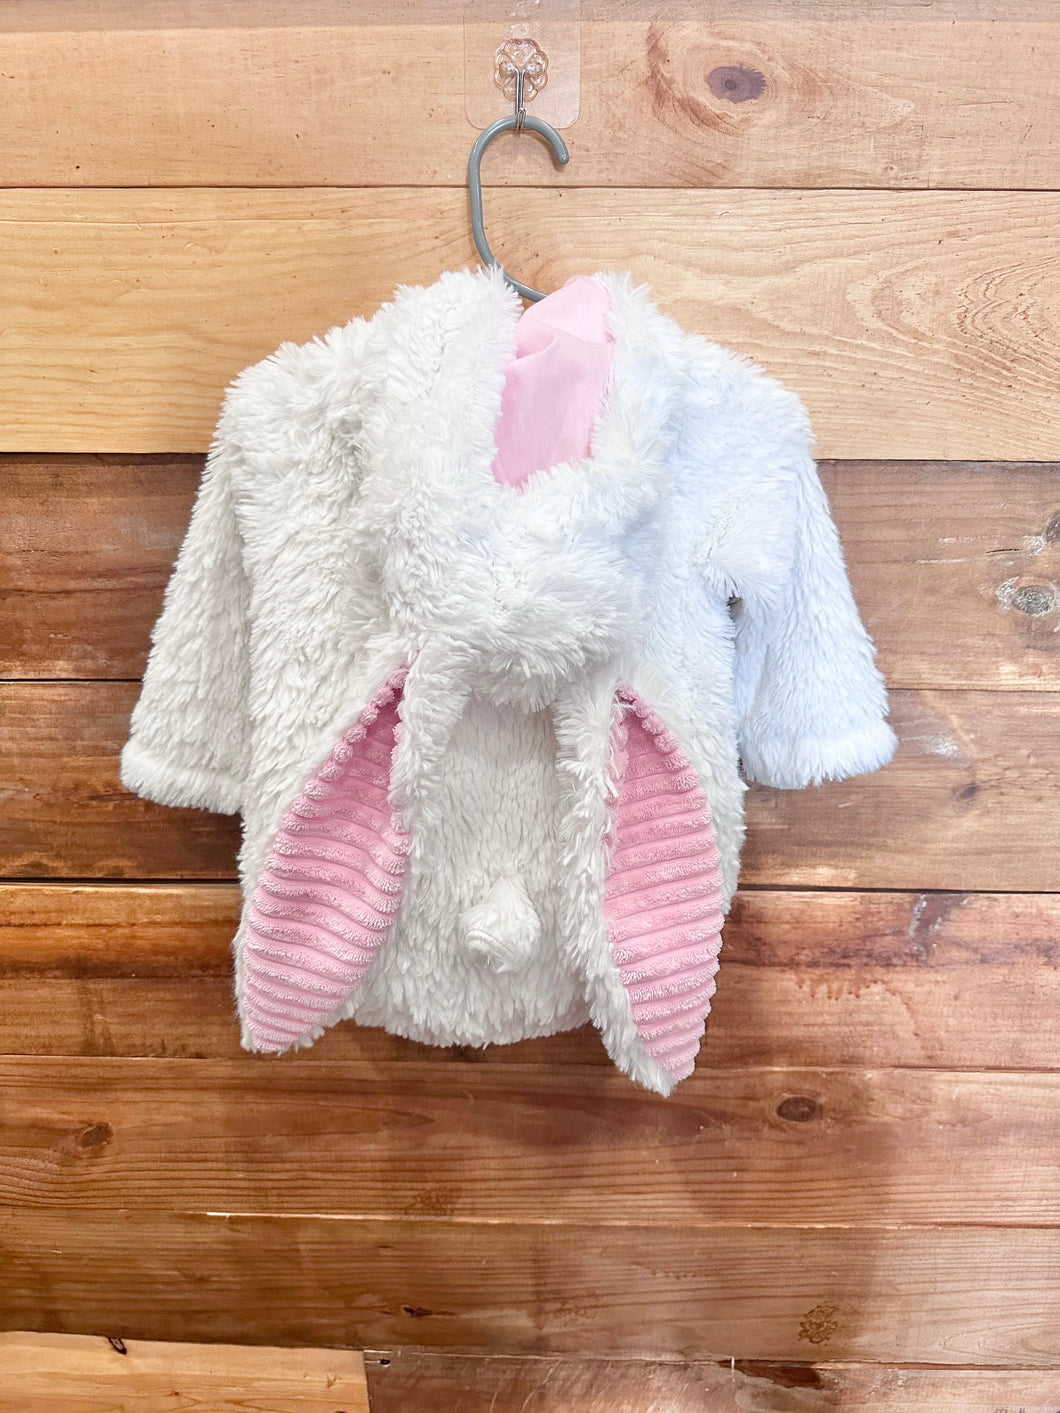 Mudpie Fur Bunny Outfit/Costume Up to 18m